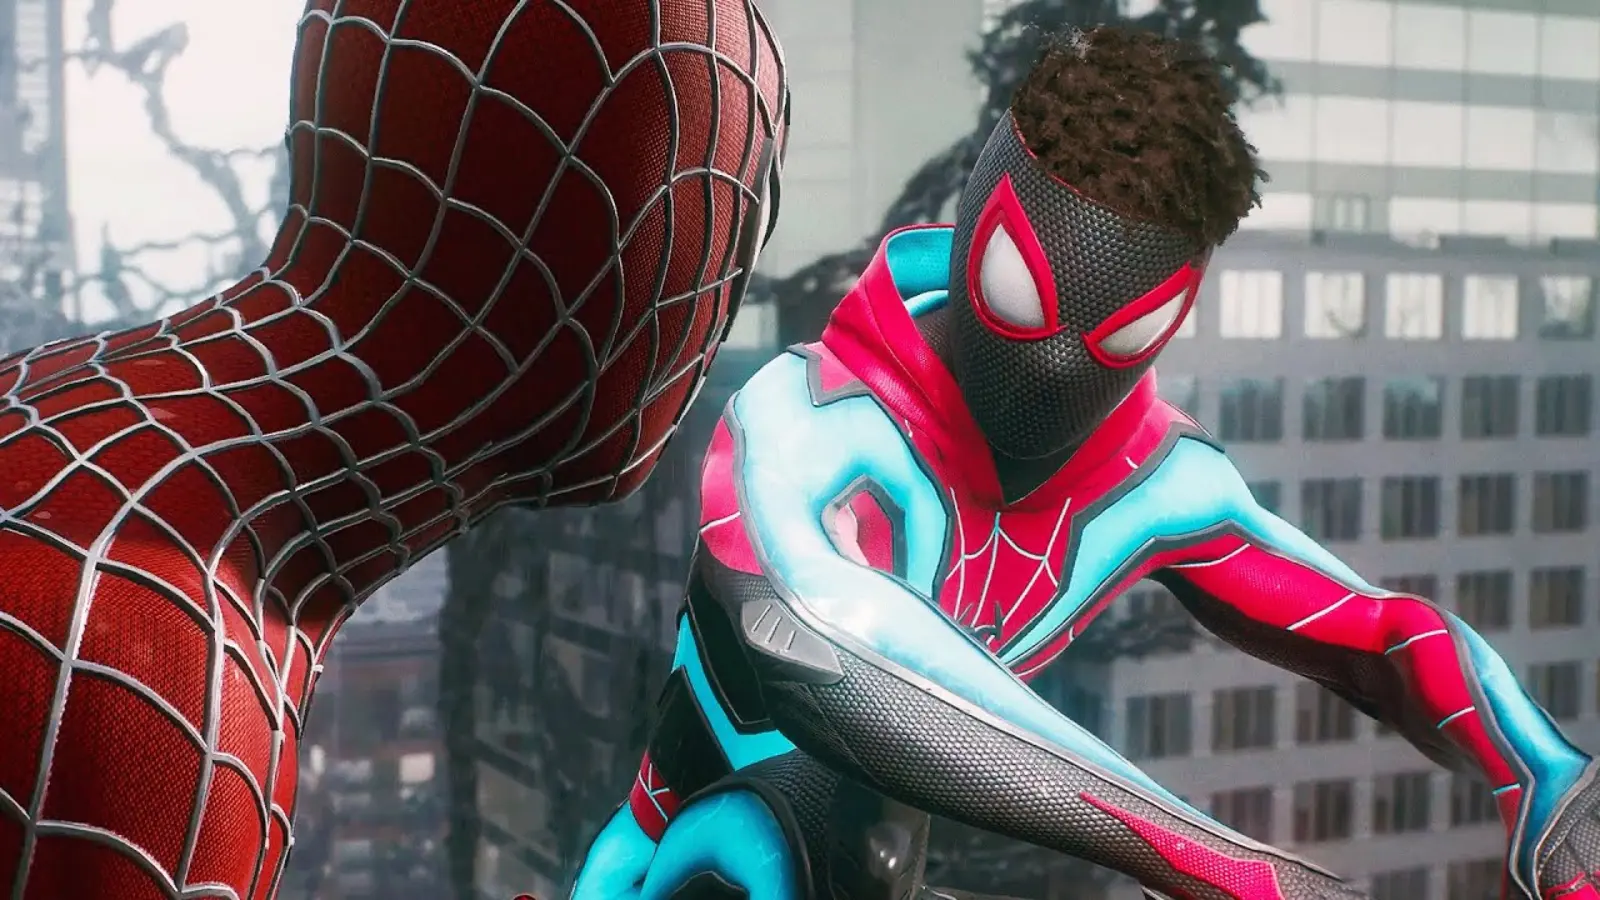 Marvel's Spider-Man 2 preview: hands-on with the web-slinging duo